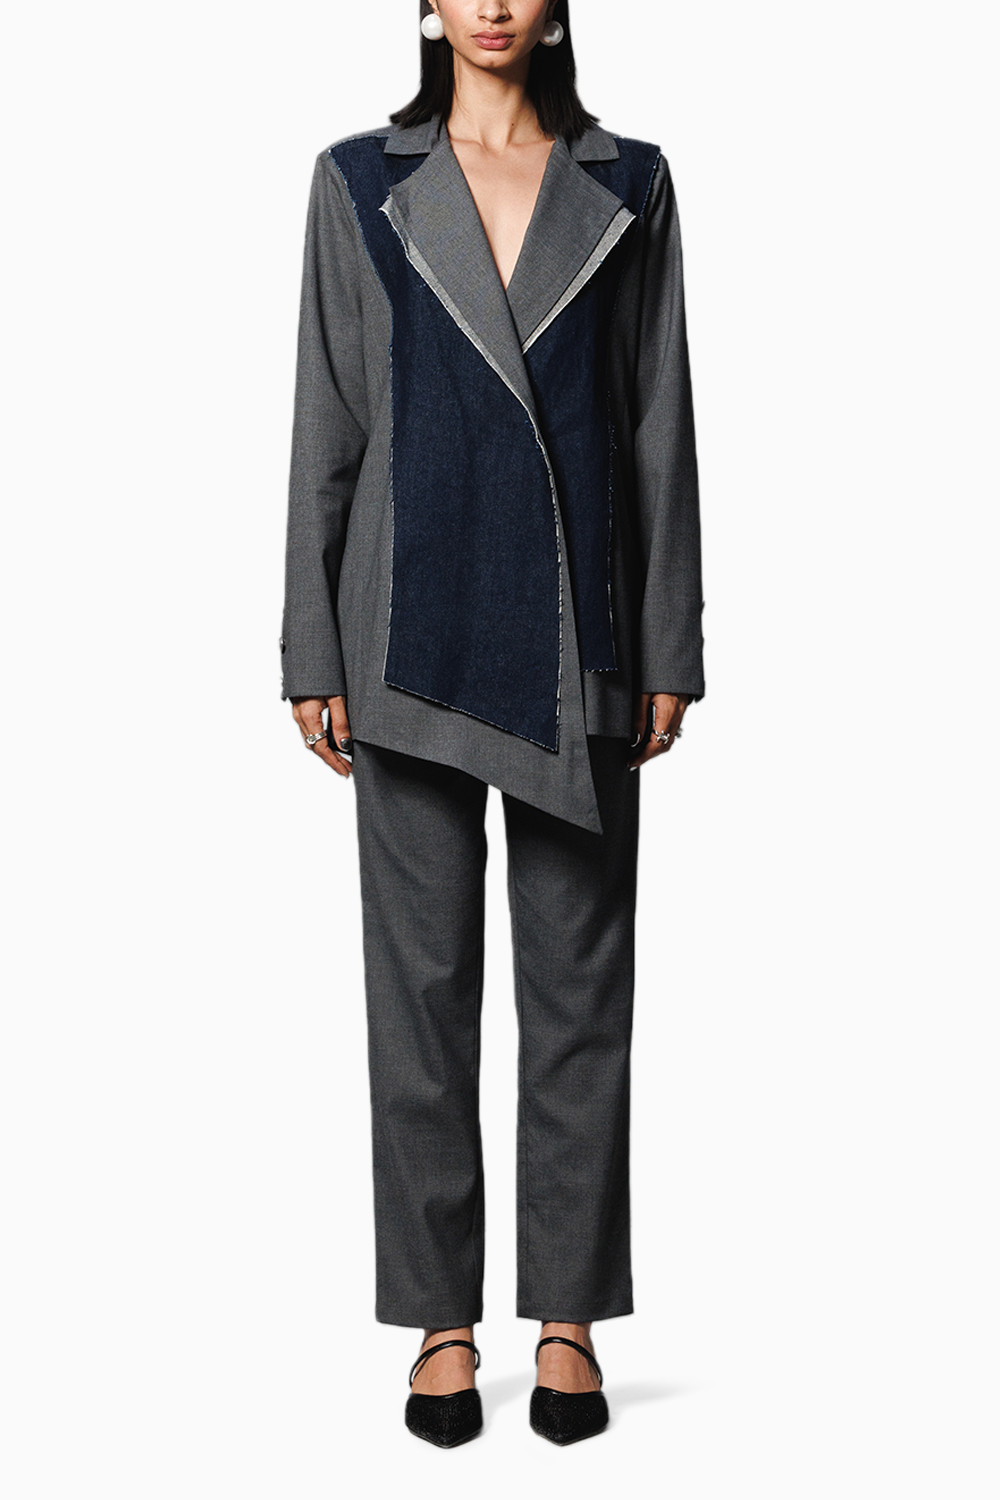 Grey Dual Panelled Blazer and Pants Suit